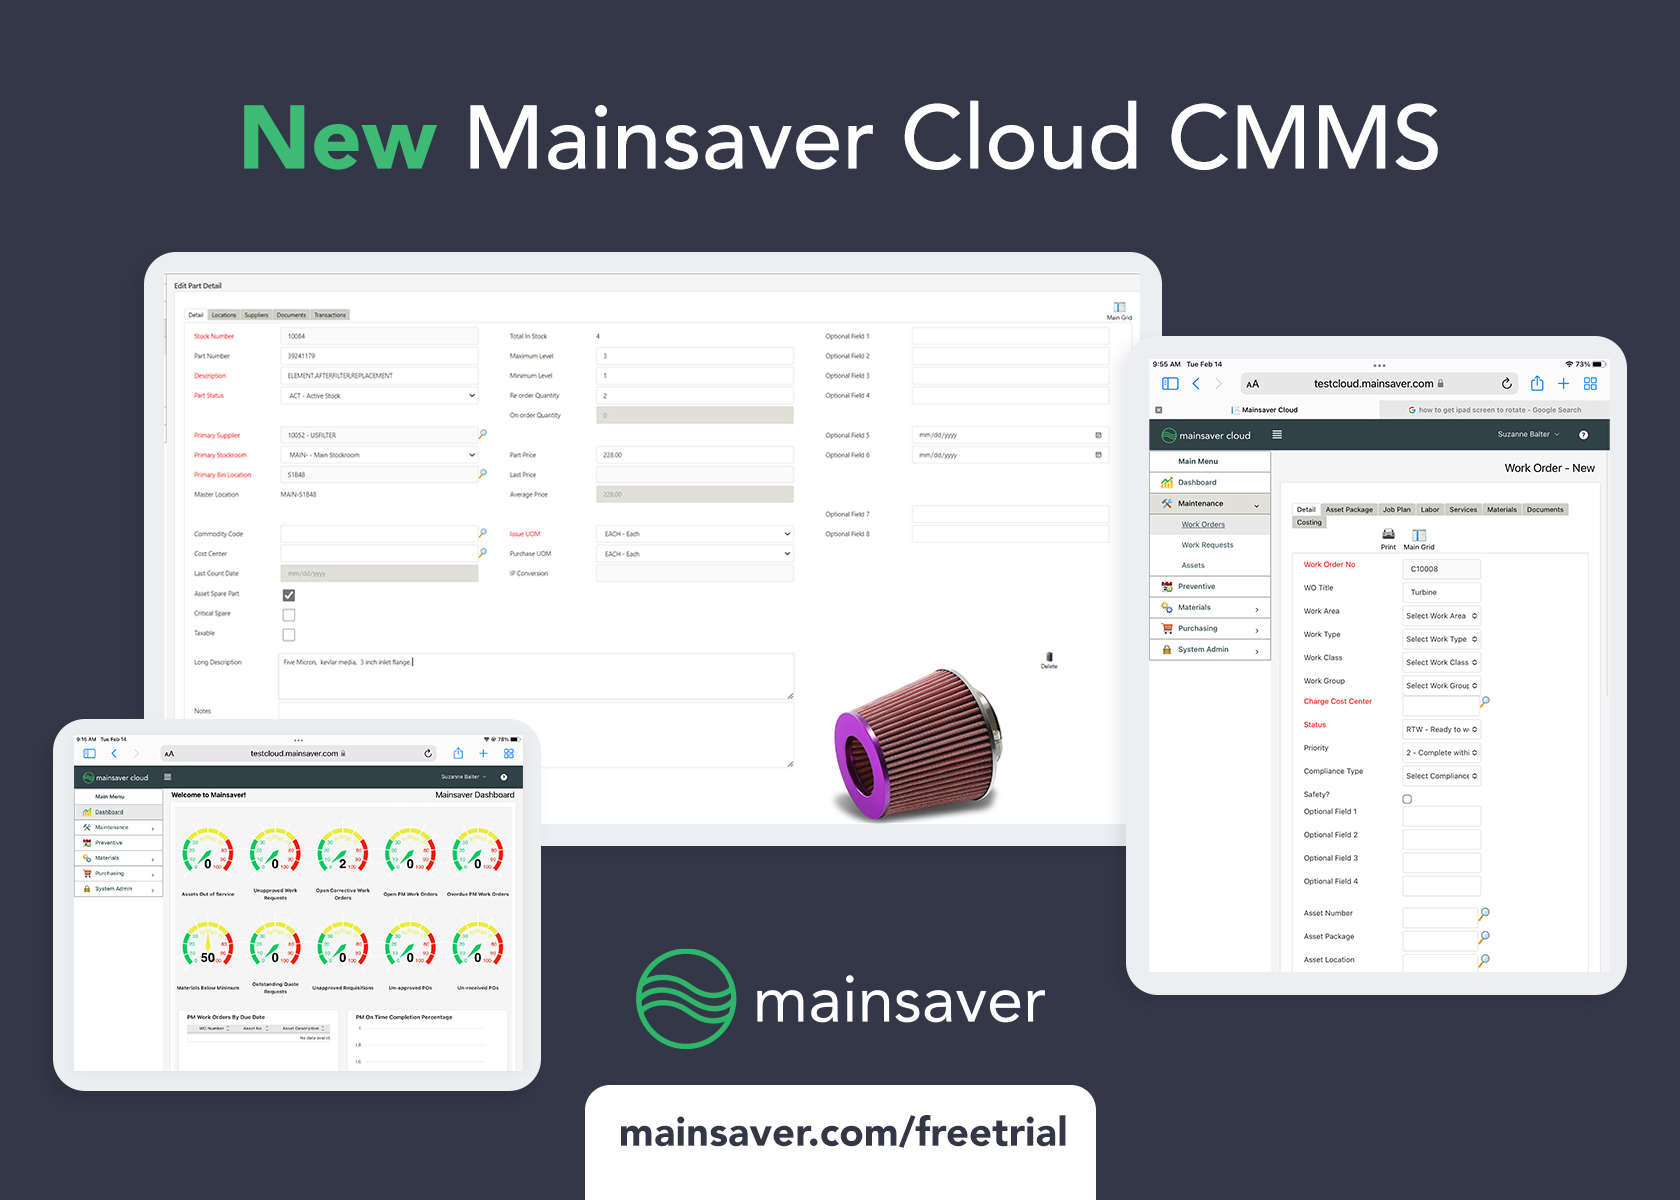 Mainsaver Cloud provides an efficient, easy-to-use, and reliable CMMS platform to manage work orders, tackle preventative maintenance, manage purchasing and spare parts inventories, and make data-driven decisions about assets and resources.